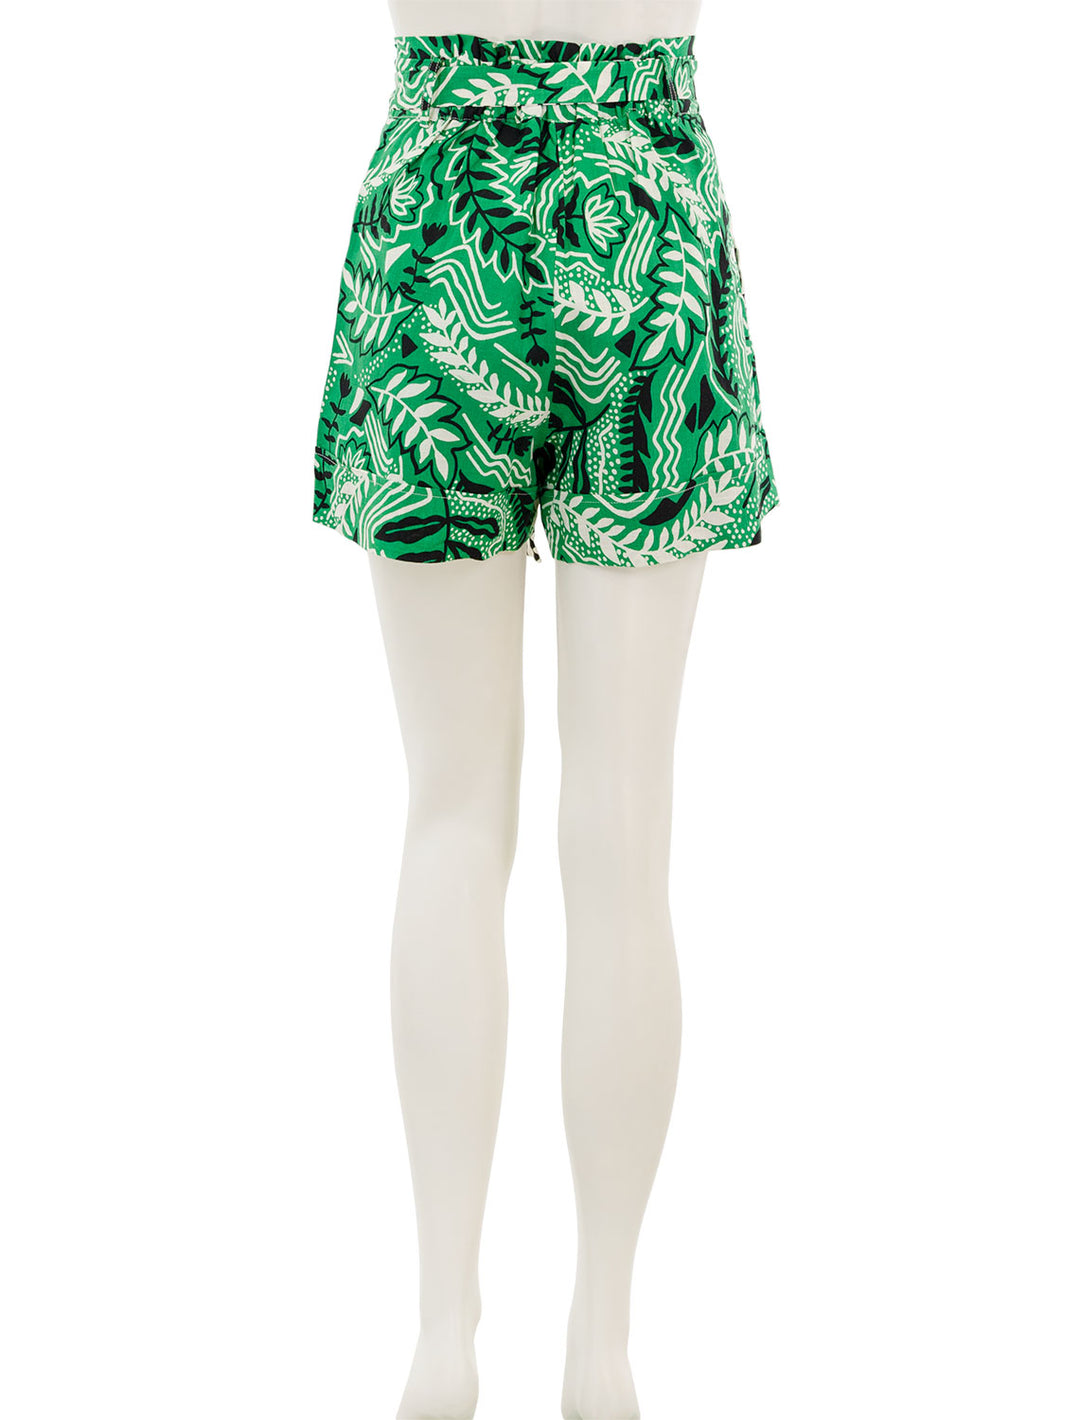 Back view of Suncoo Paris' banny shorts in vert botanical.